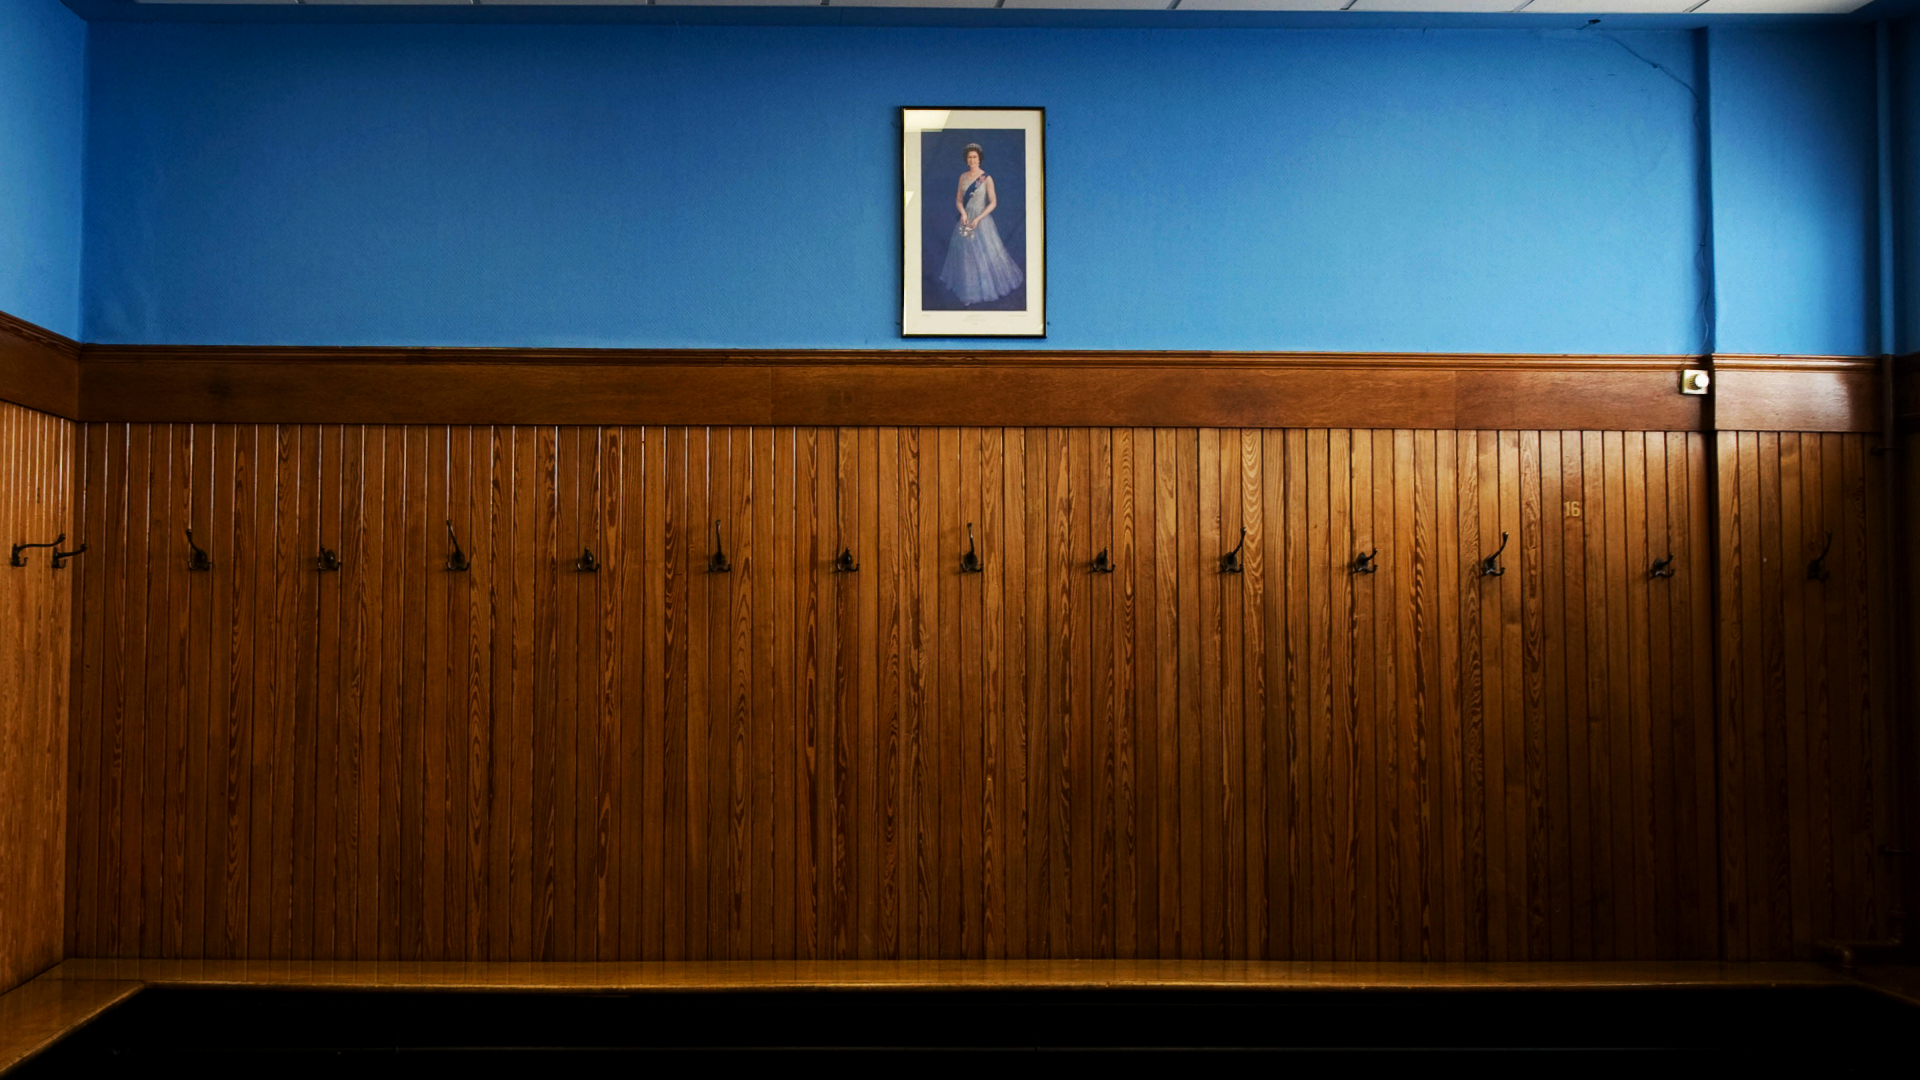 The home dressing room at Ibrox, home of Rangers Football Club, with a portrait of Queen Elizabeth hanging on the wall.